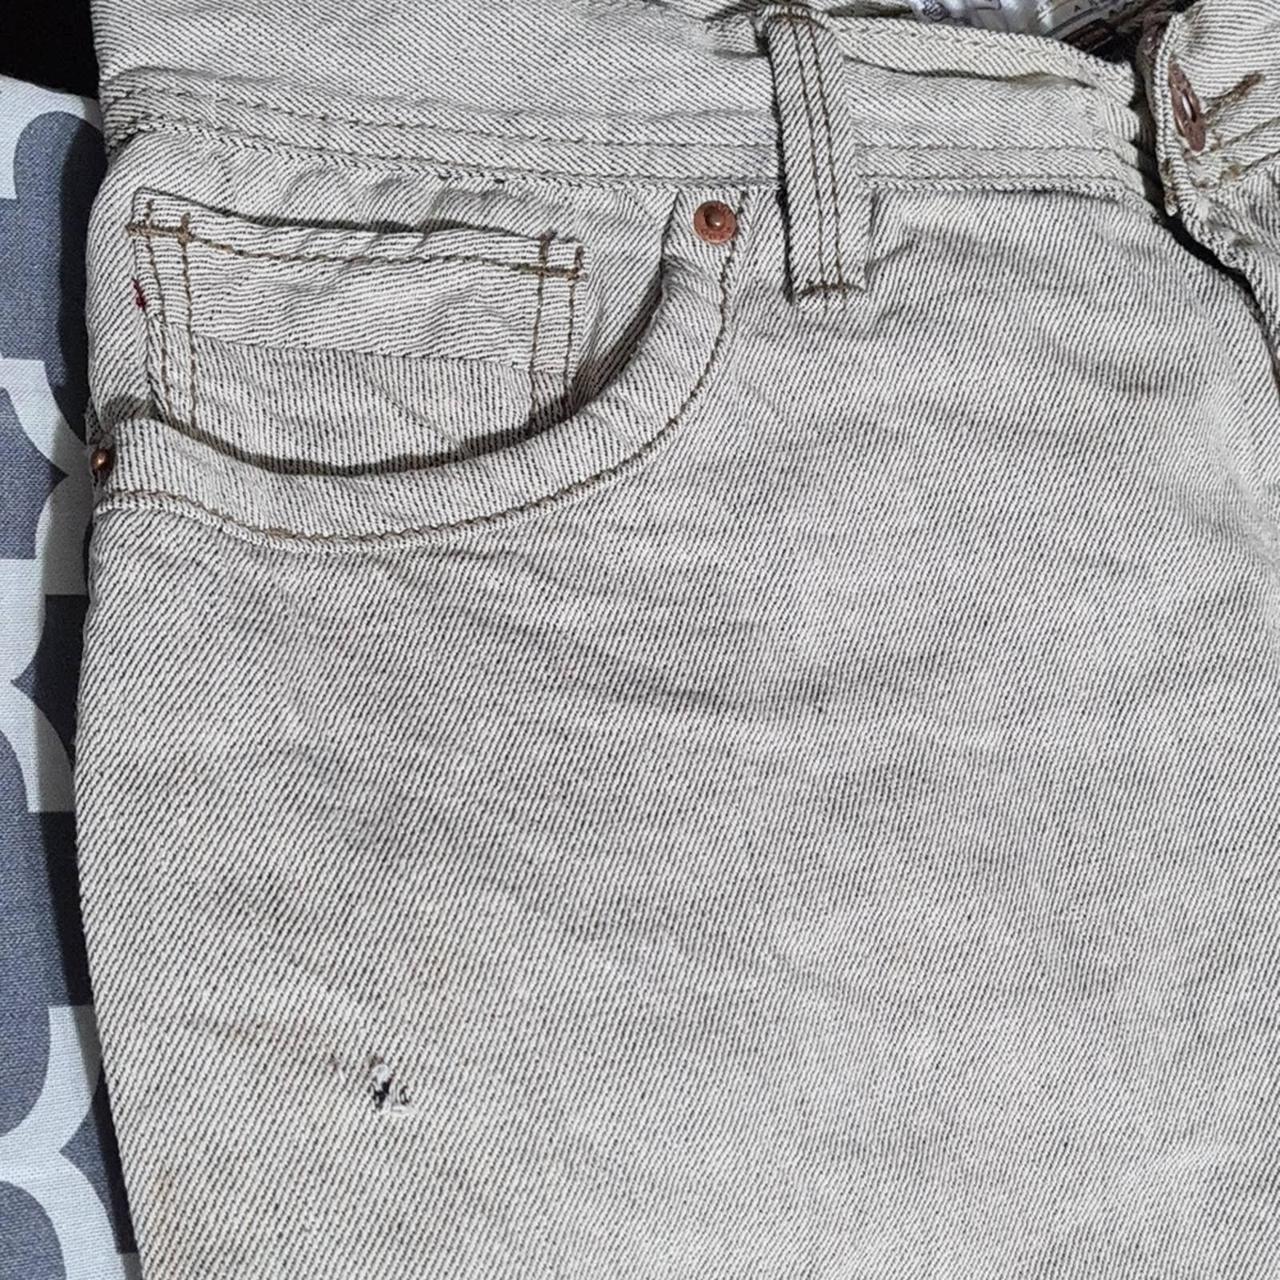 Product Image 3 - Akoo Beige Jeans Size 32x31

*tag